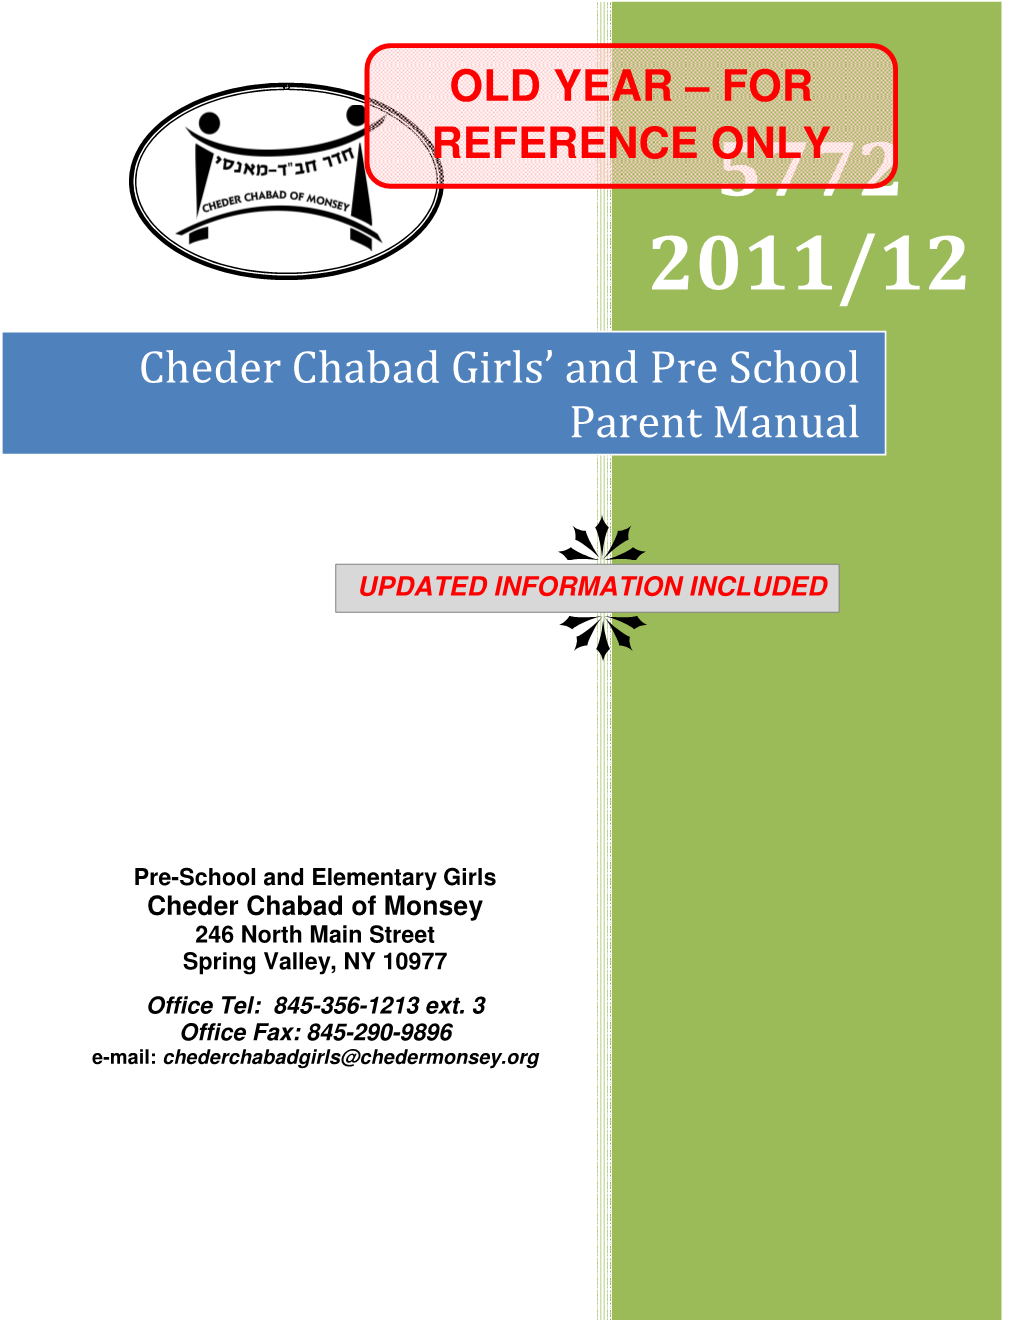 Cheder Chabad Girls' and Pre School Parent Manual